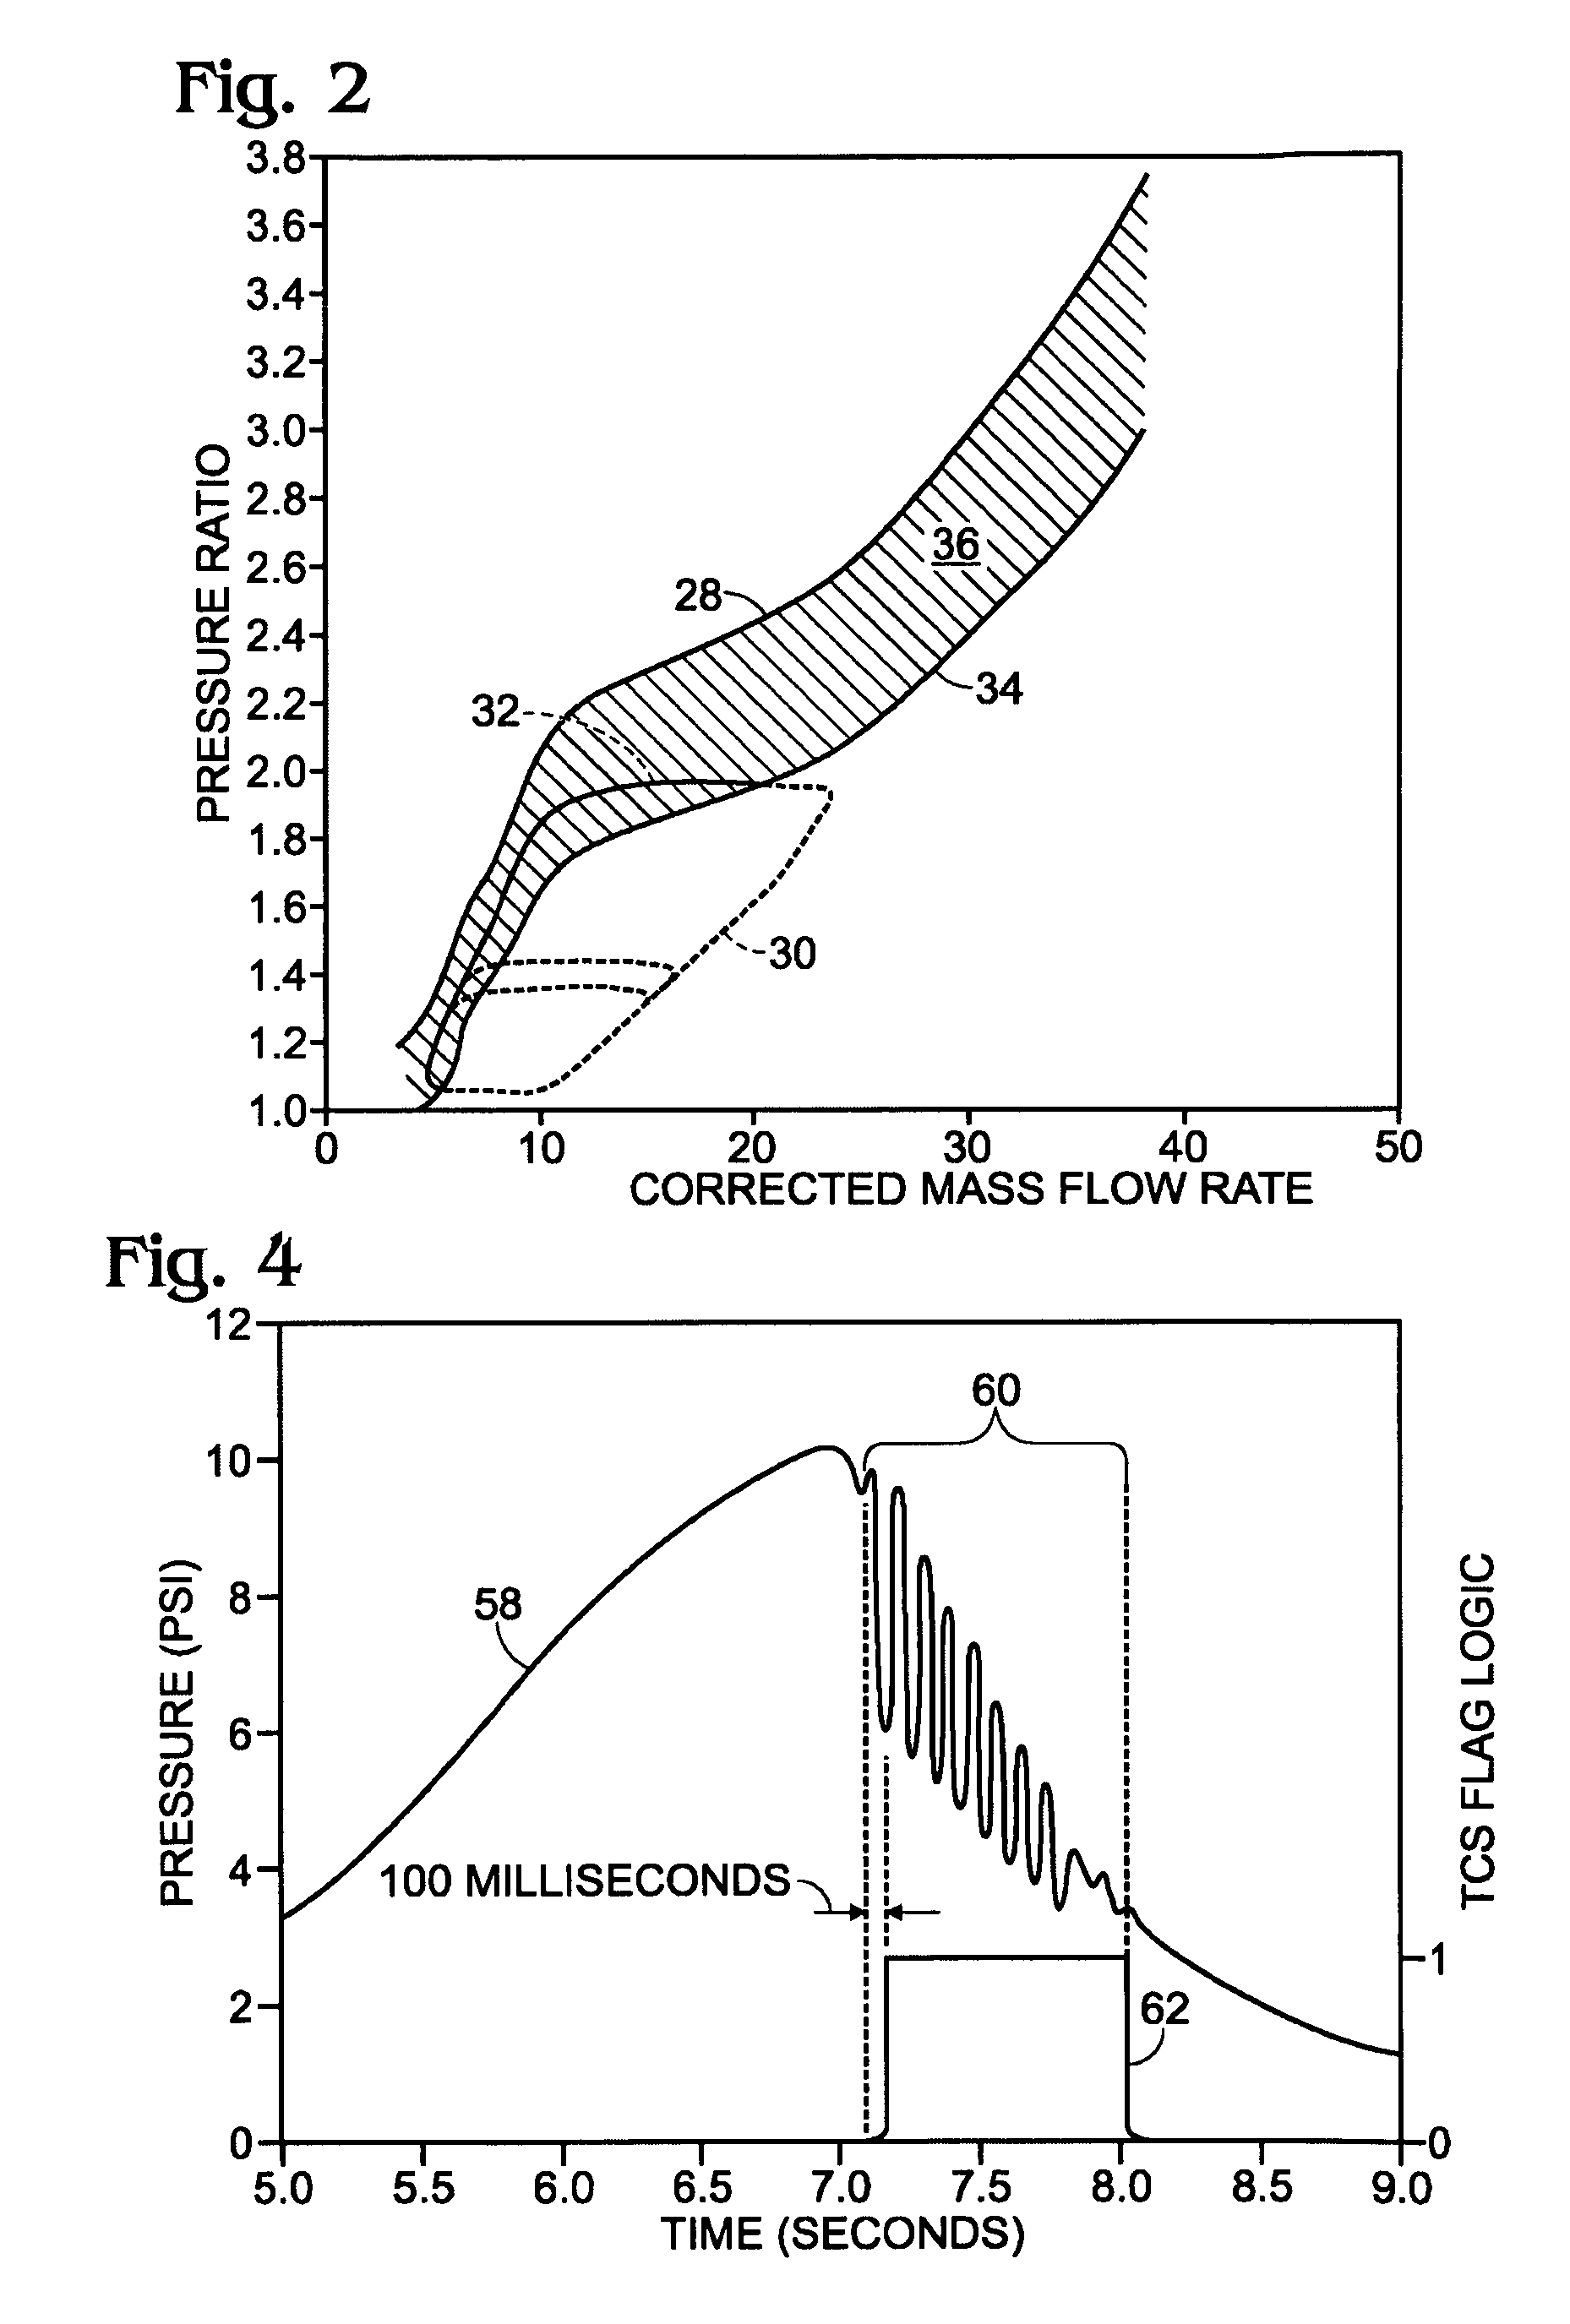 Transient compressor surge response for a turbocharged engine